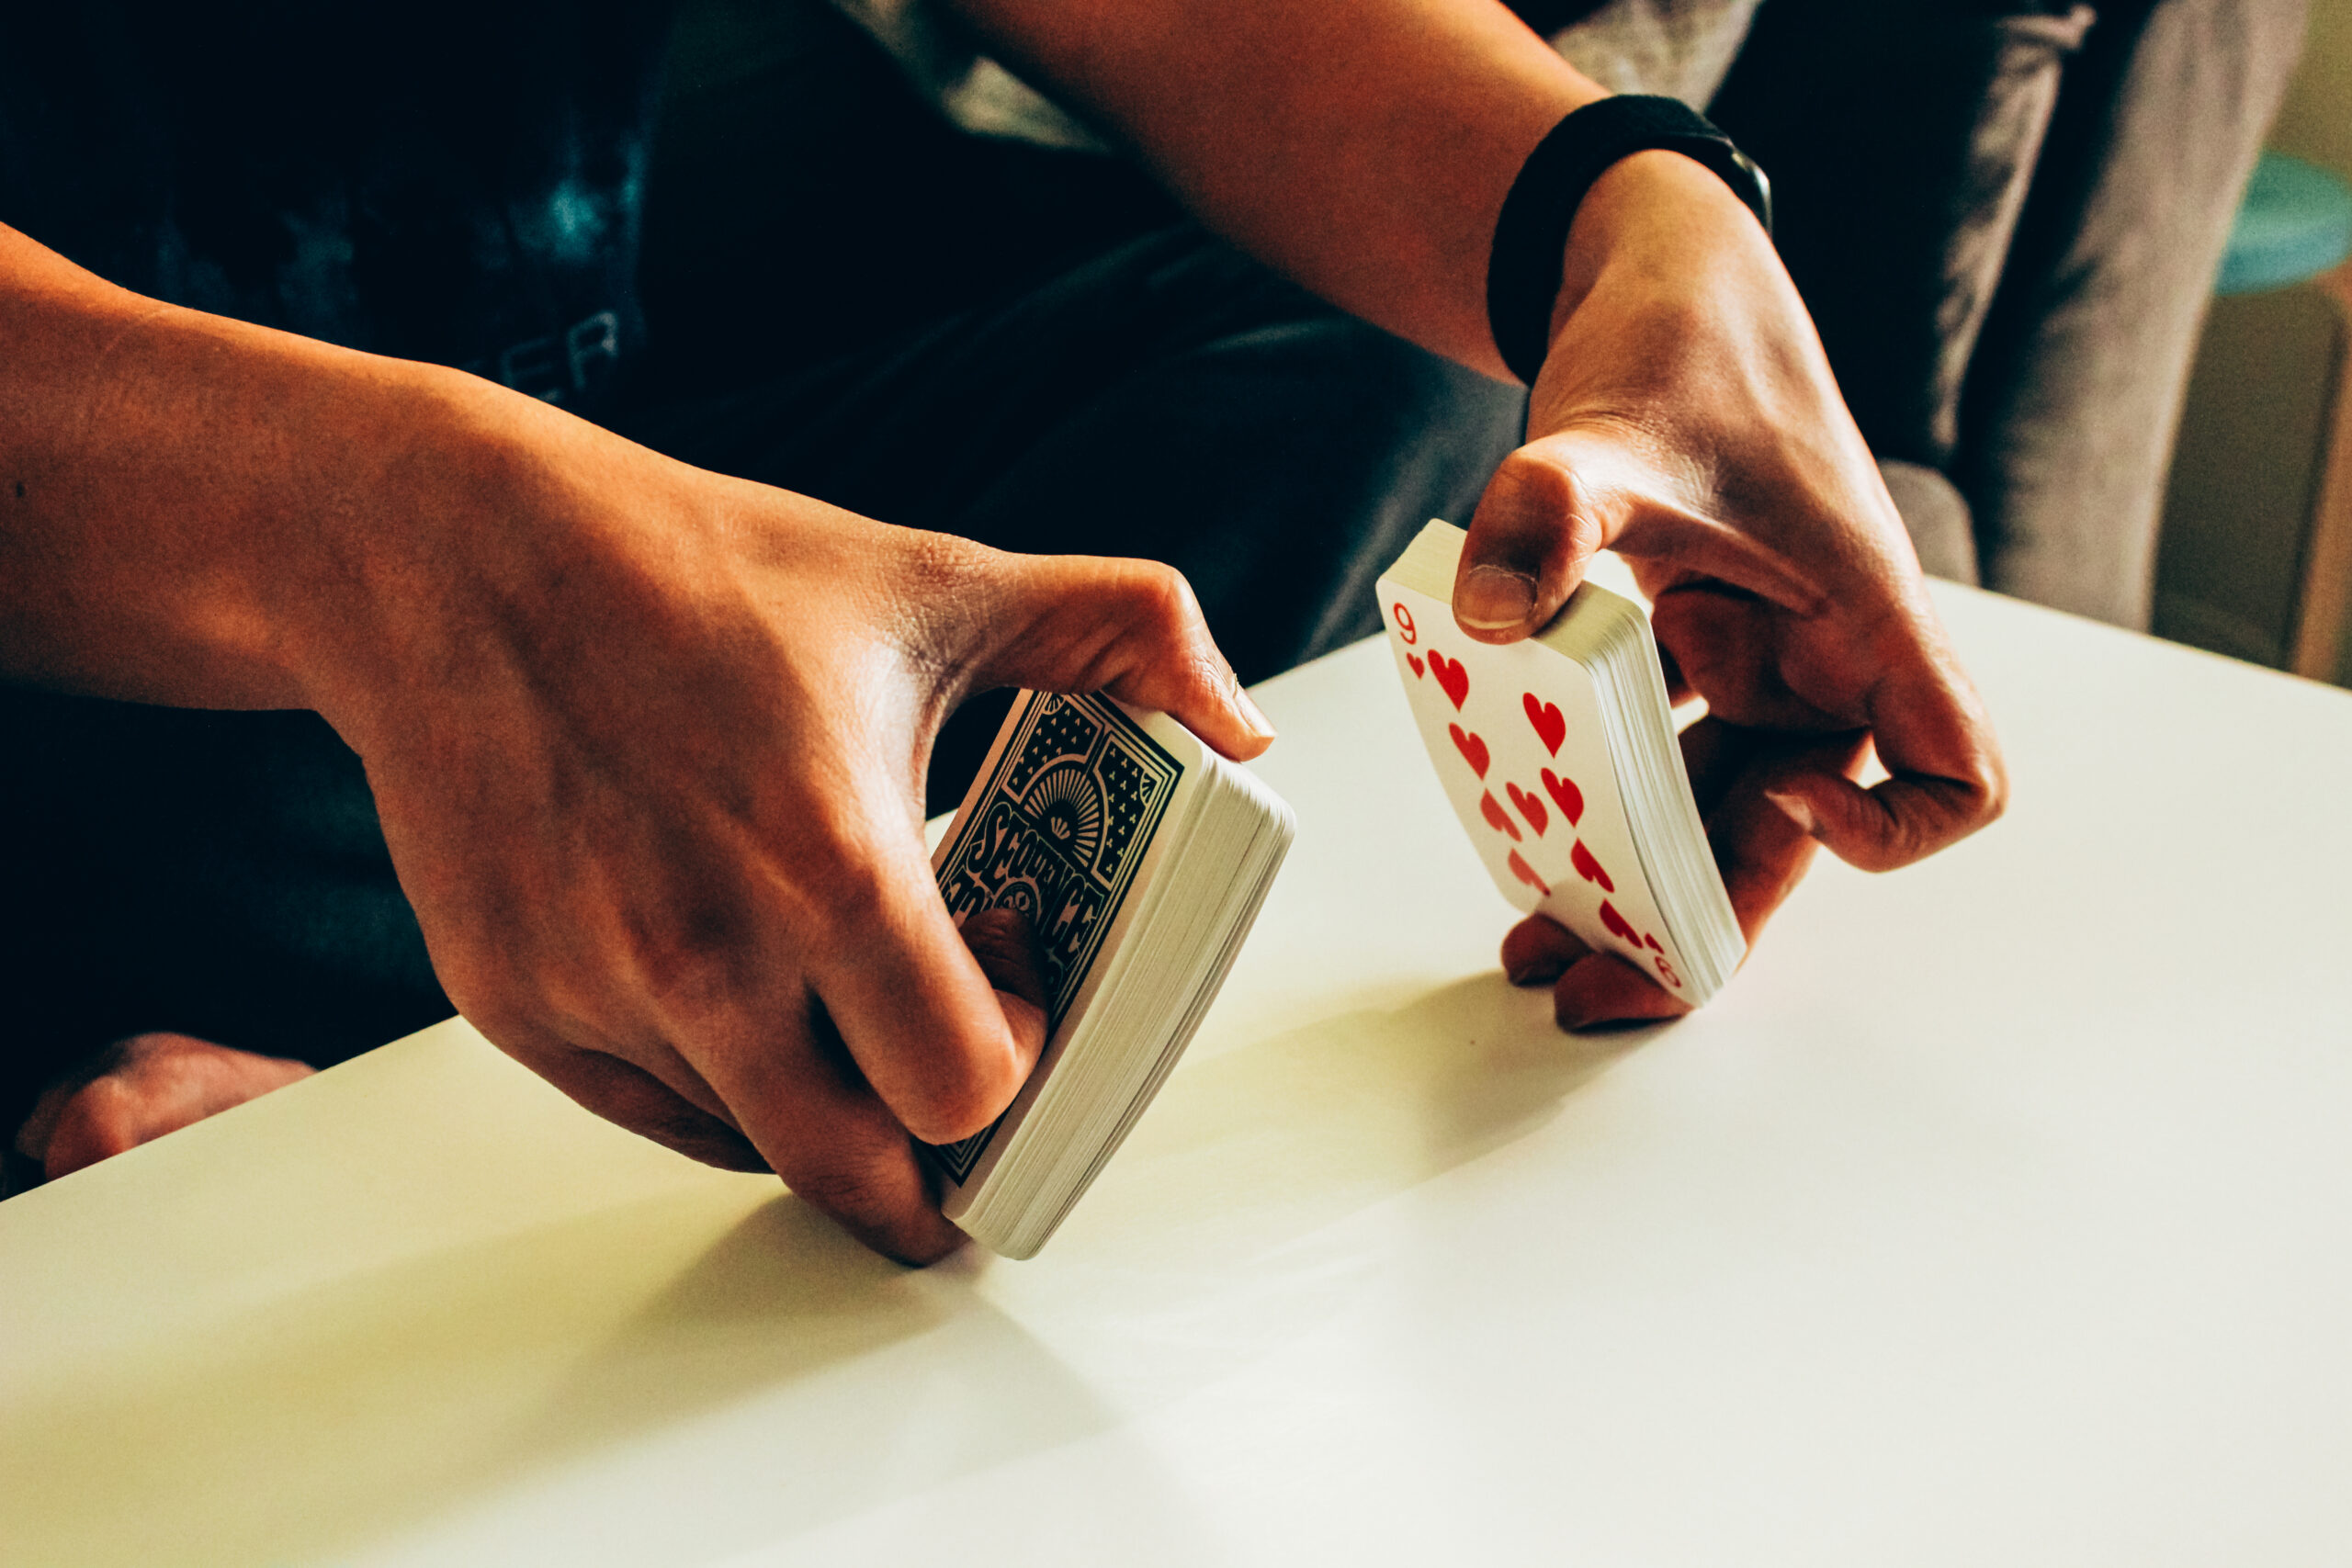 5 Things Small Business Owners Can Learn From Poker